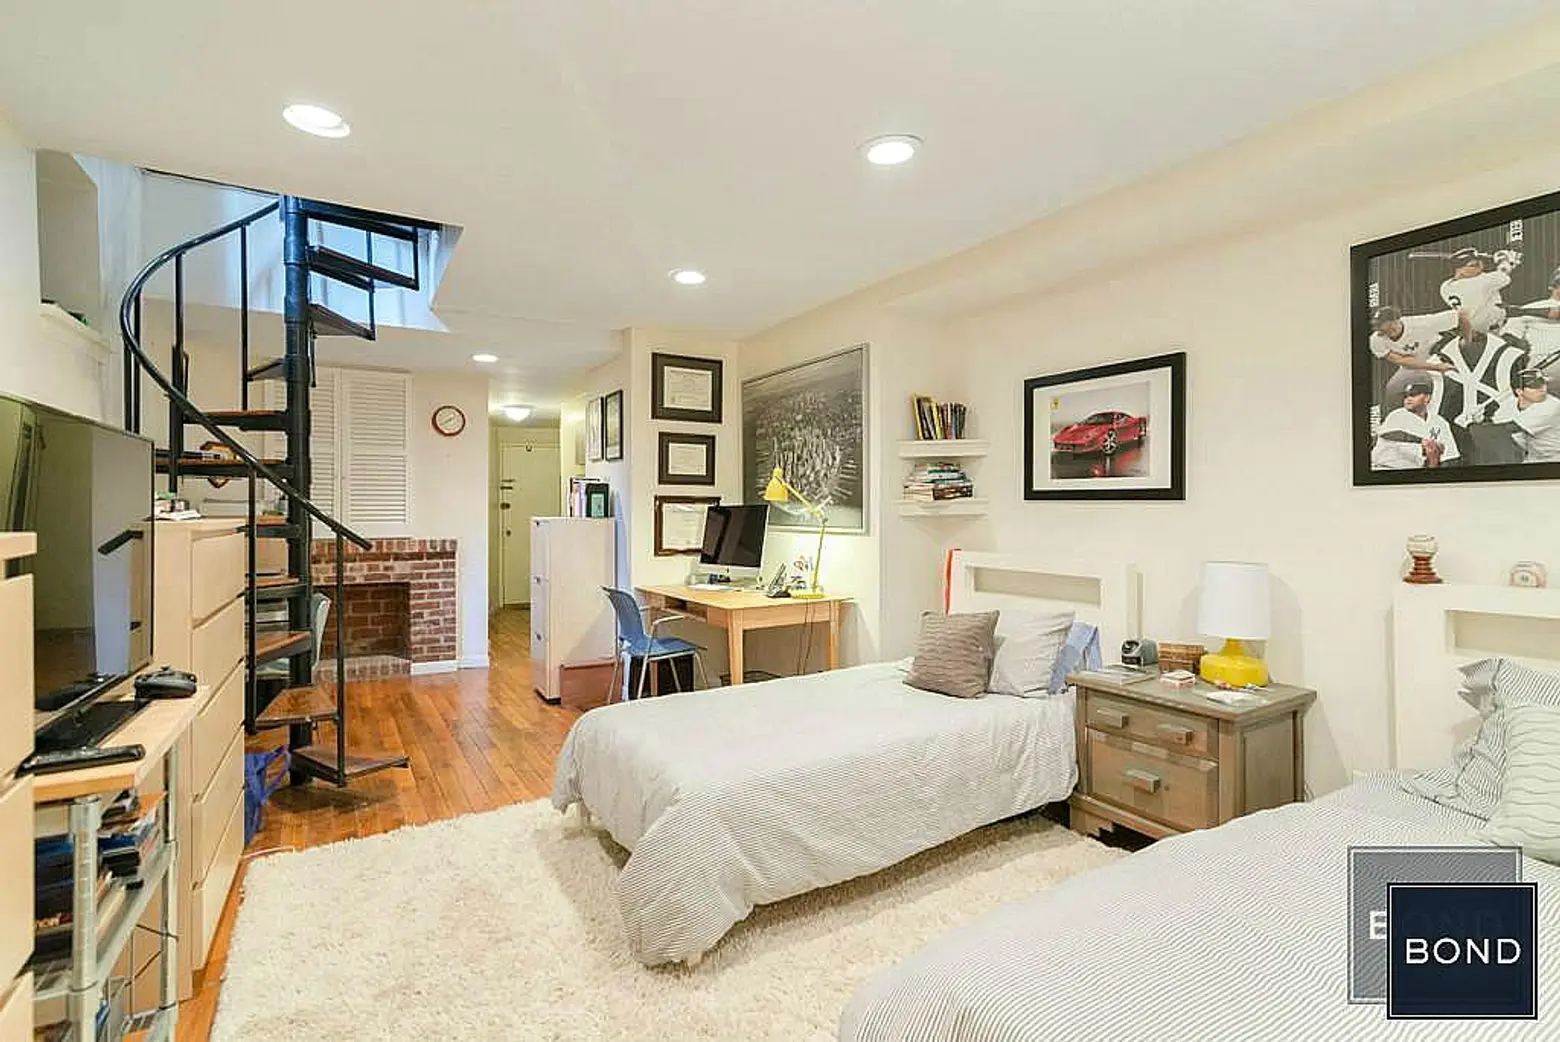 46 West 85th Street, Cool Listings, Duplex, Brownstone, Upper West Side, Manhattan, Upper West Side Apartment for rent